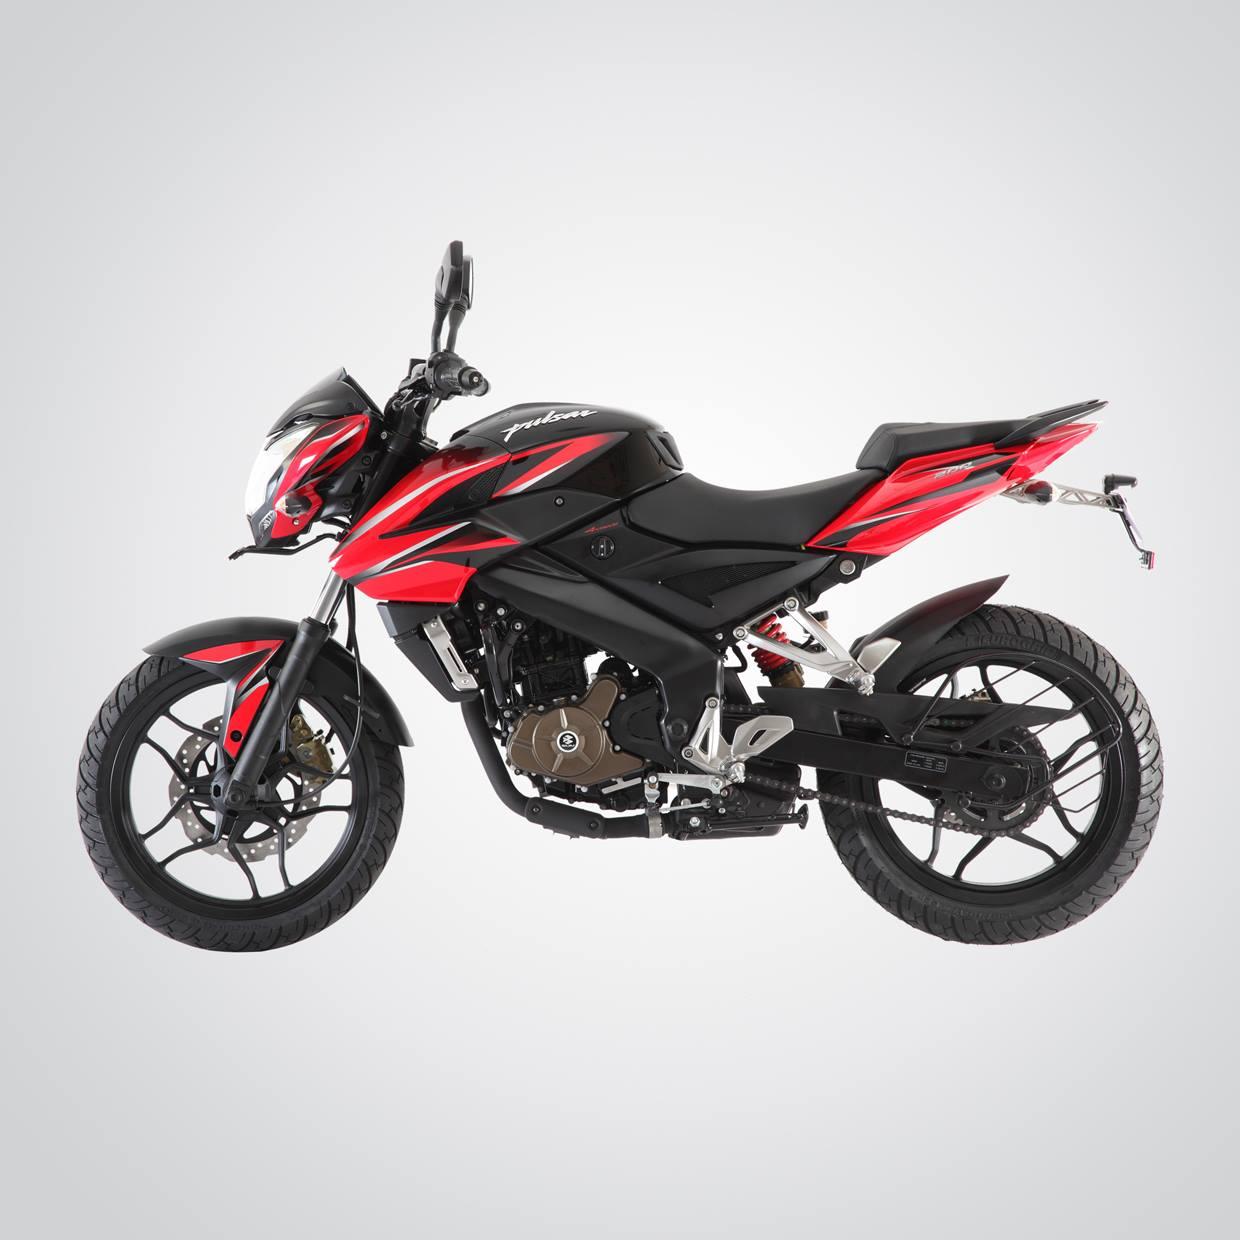 Bajaj Pulsar 200NS In 'Red And Black' Dual Tone Paint Finish